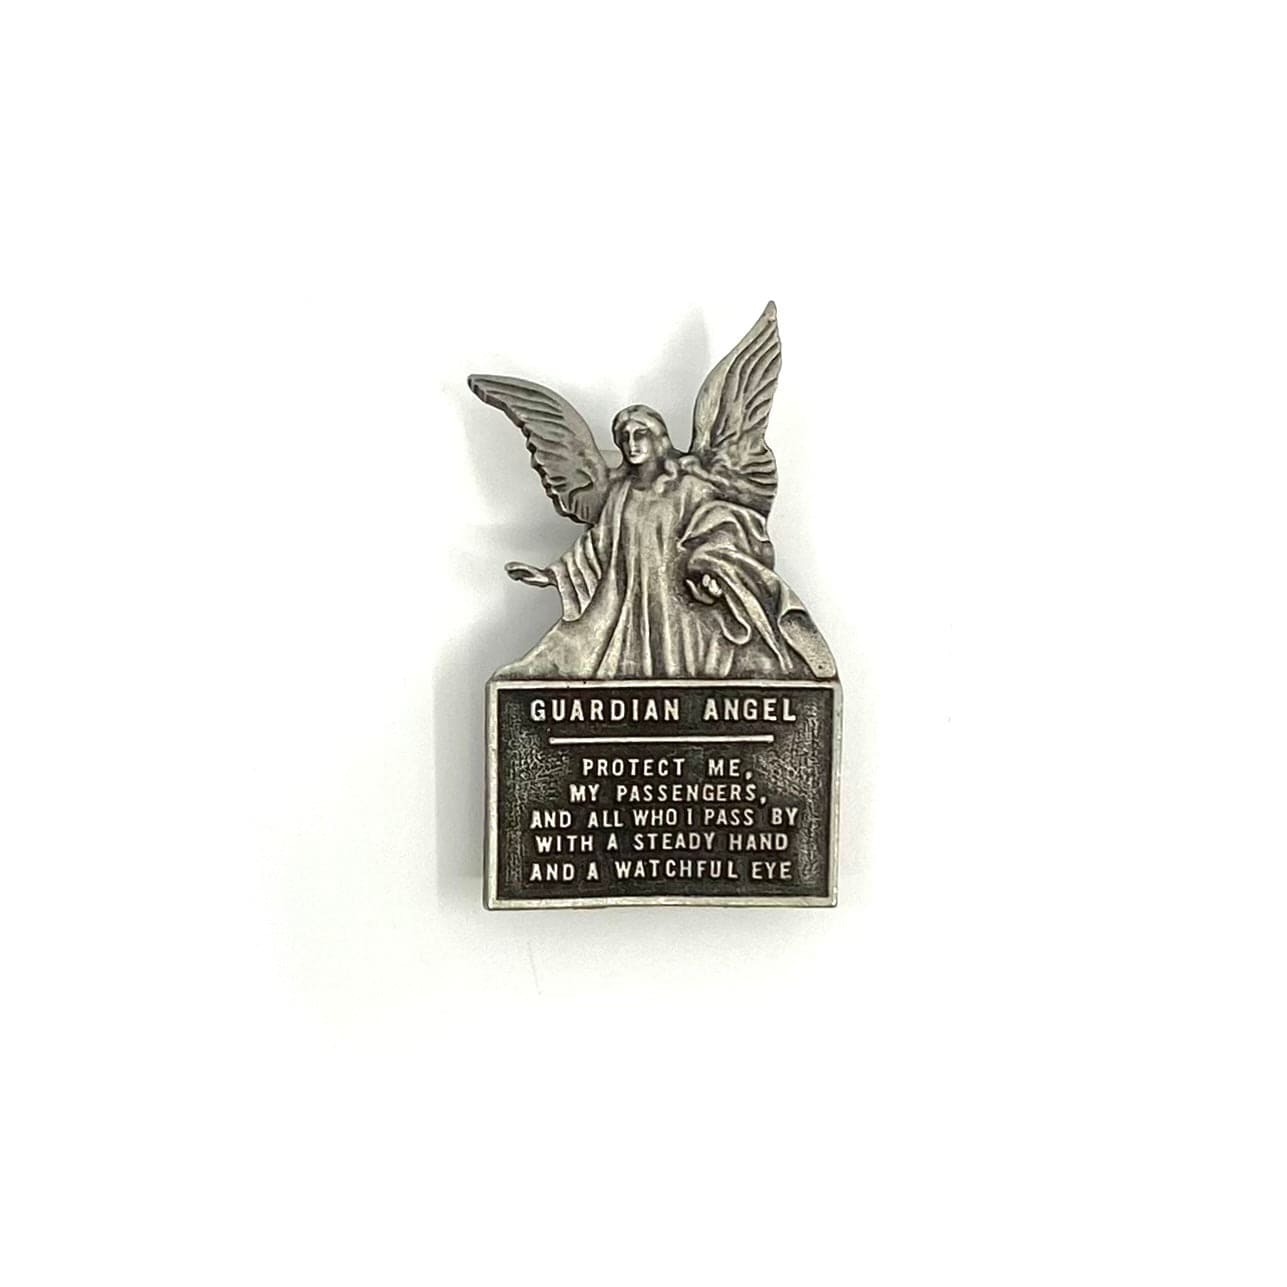 Vintage Pewter Guardian Angel Car Visor Clip “PROTECT ME, MY PASSENGERS, AND ALL WHO I PASS BY WITH A STEADY HAND AND A WATCHFUL EYE”